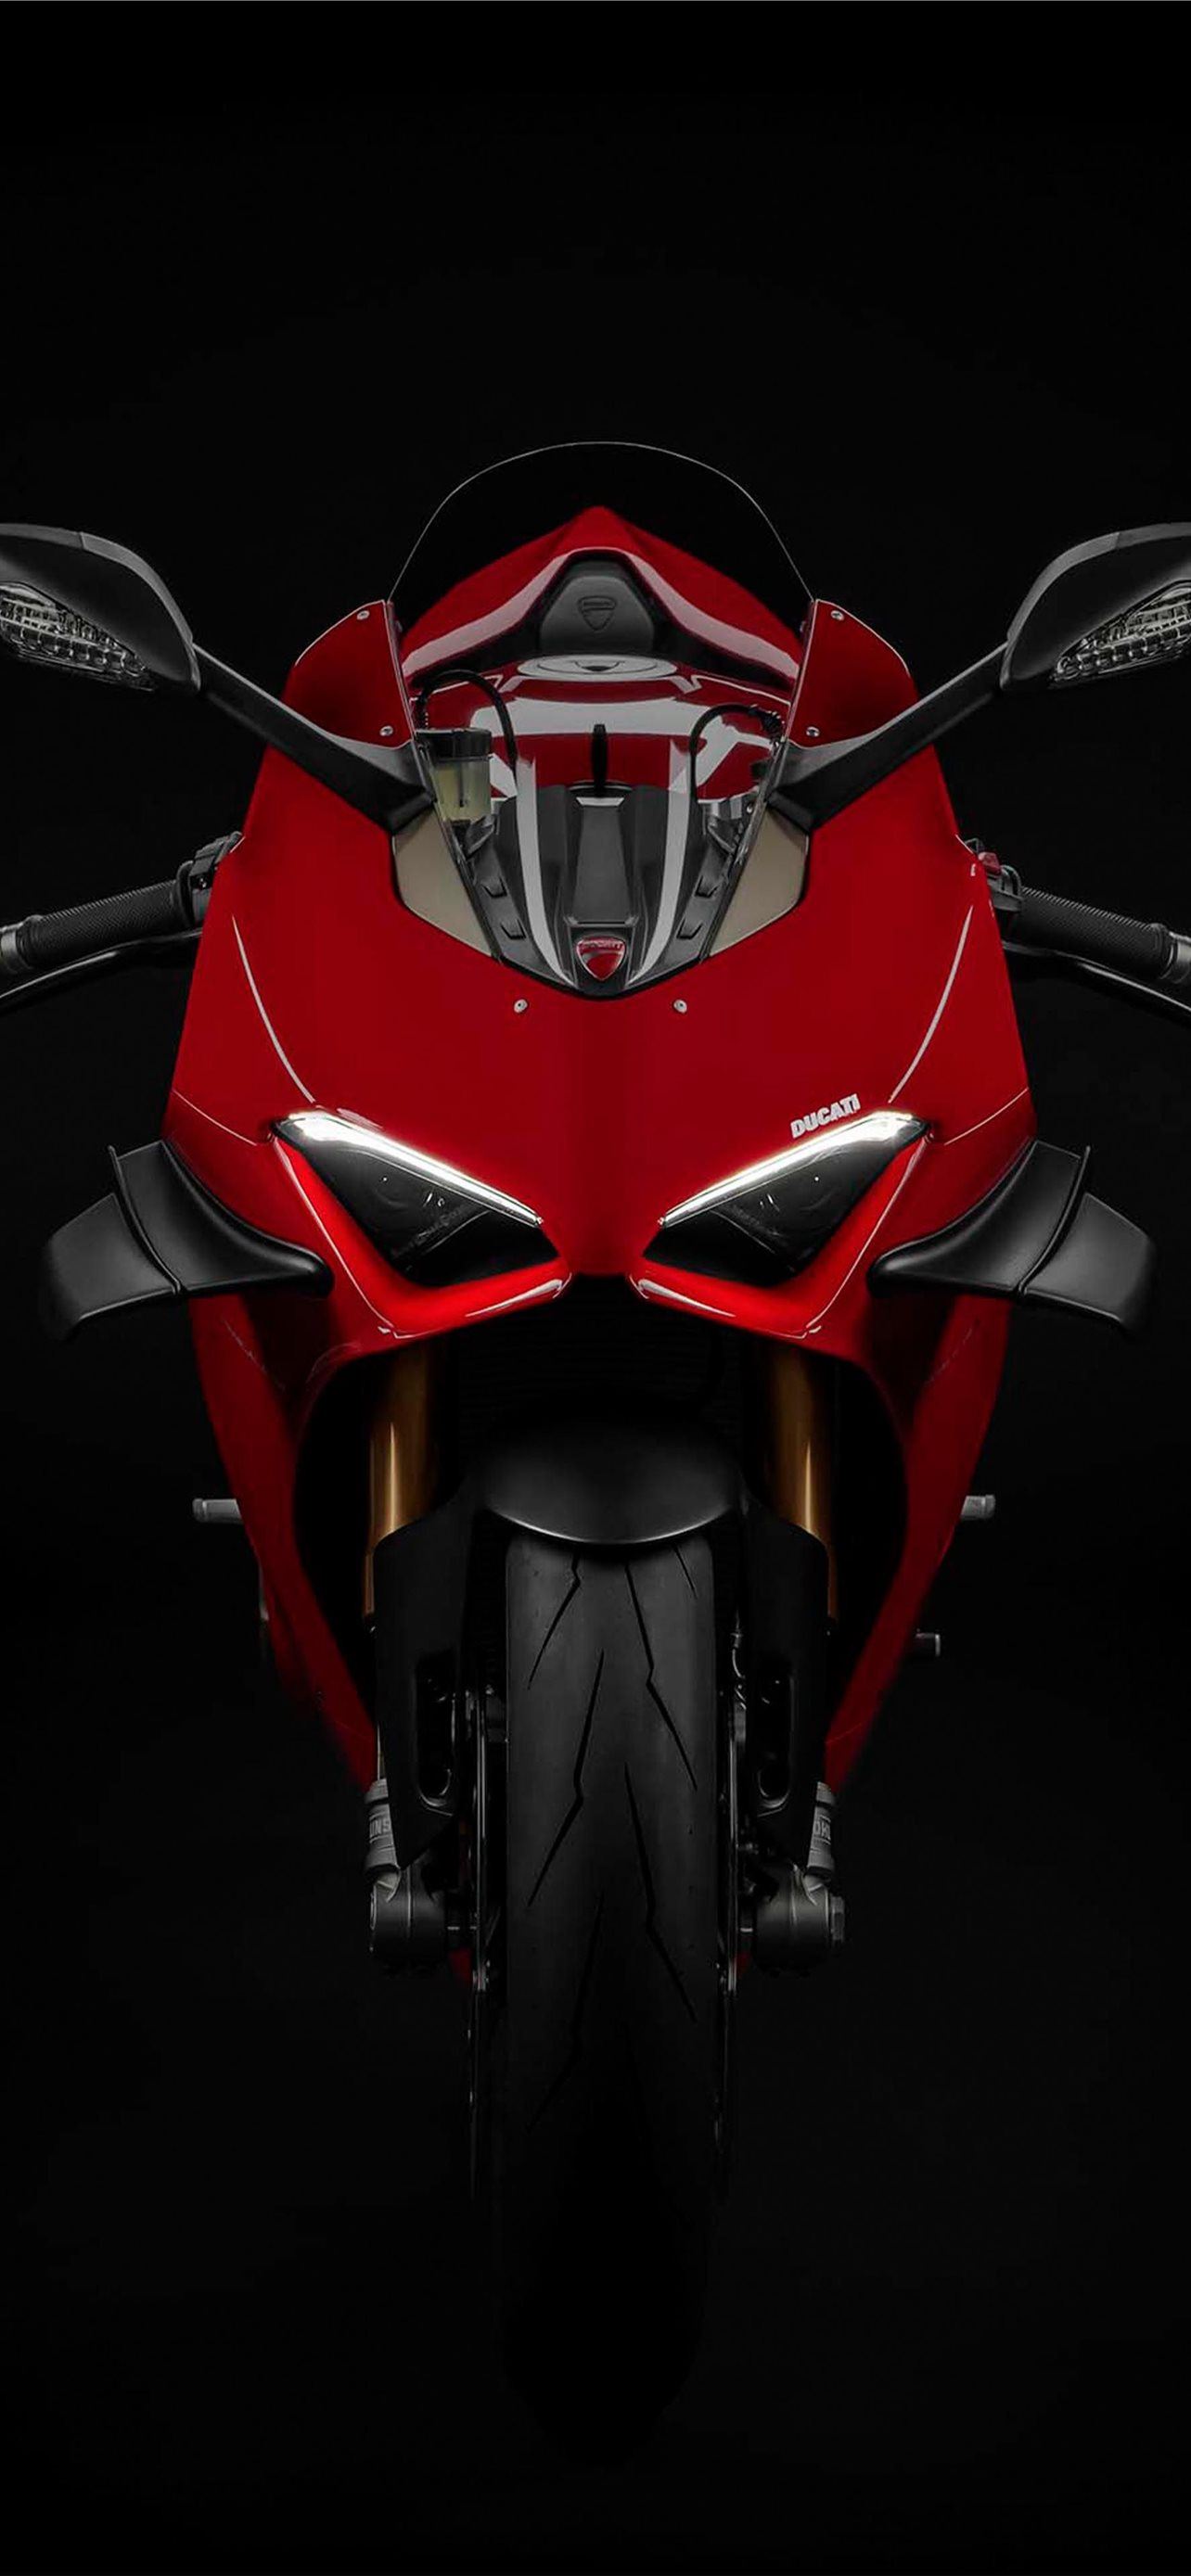 Ducati Panigale V4 Mobile Cave Iphone Wallpapers Free Download